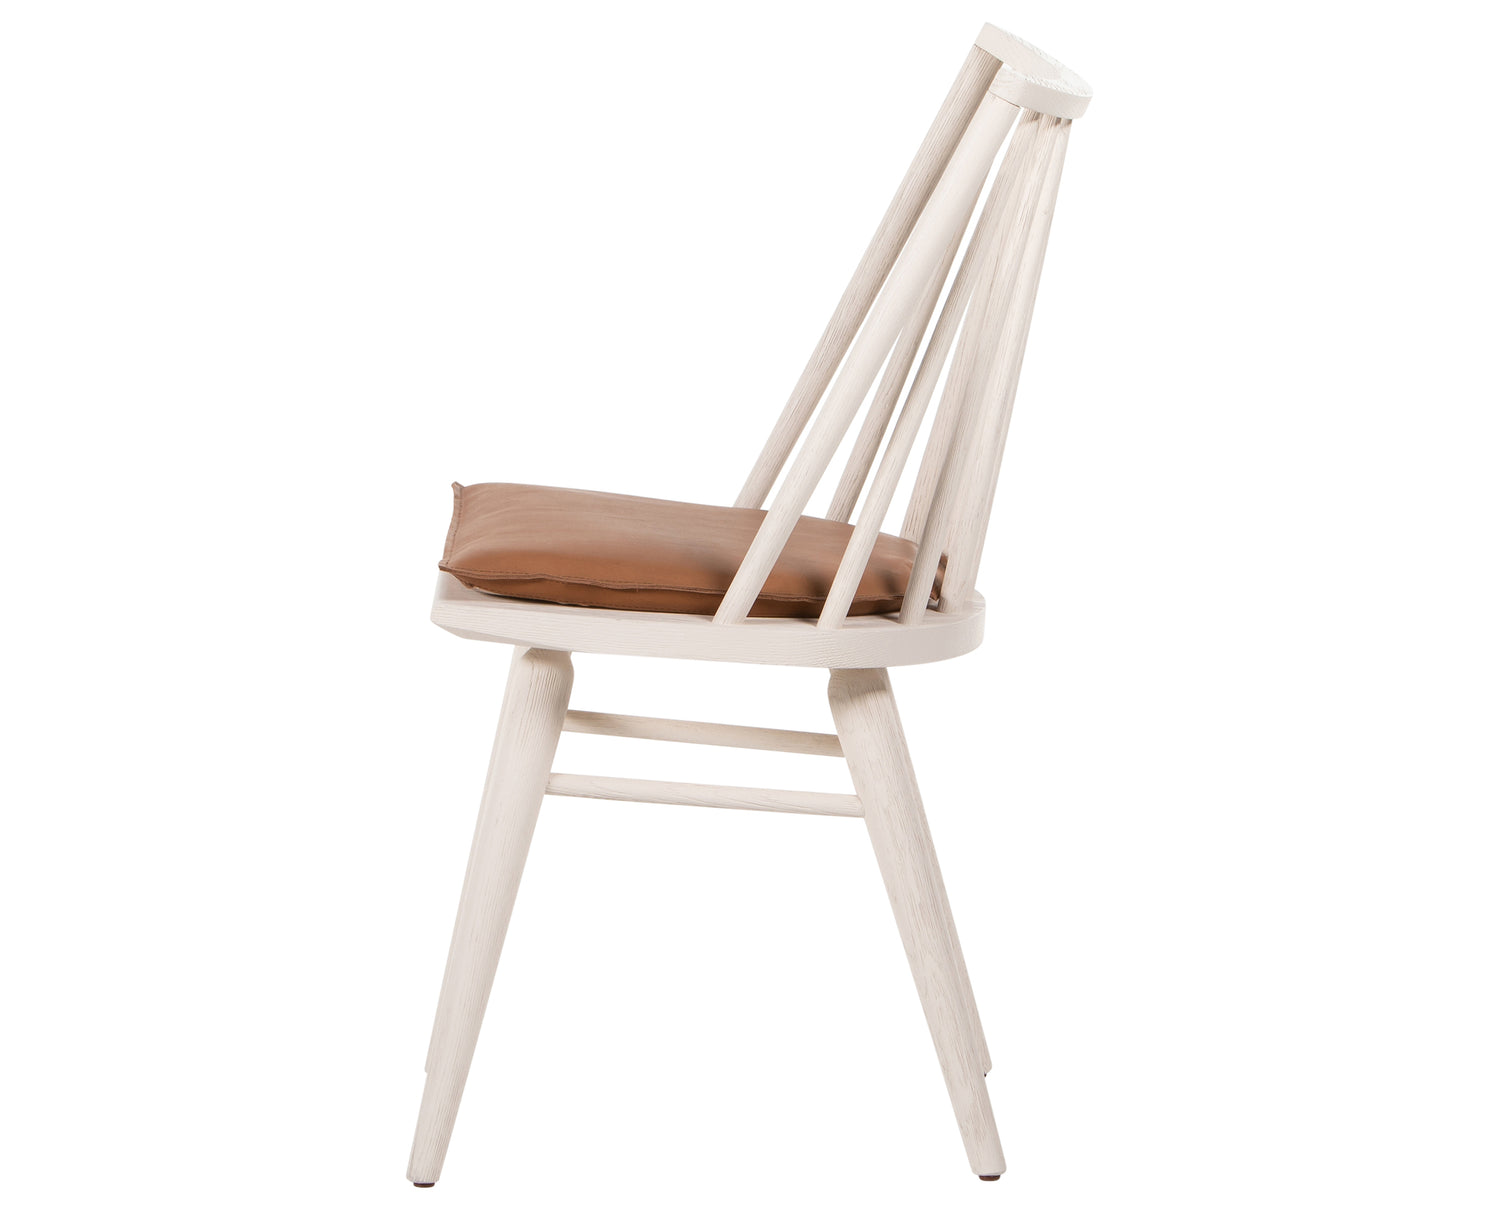 Off White Oak & Whiskey Saddle Leather with Ivory Backing Fabric | Lewis Windsor Chair | Valley Ridge Furniture